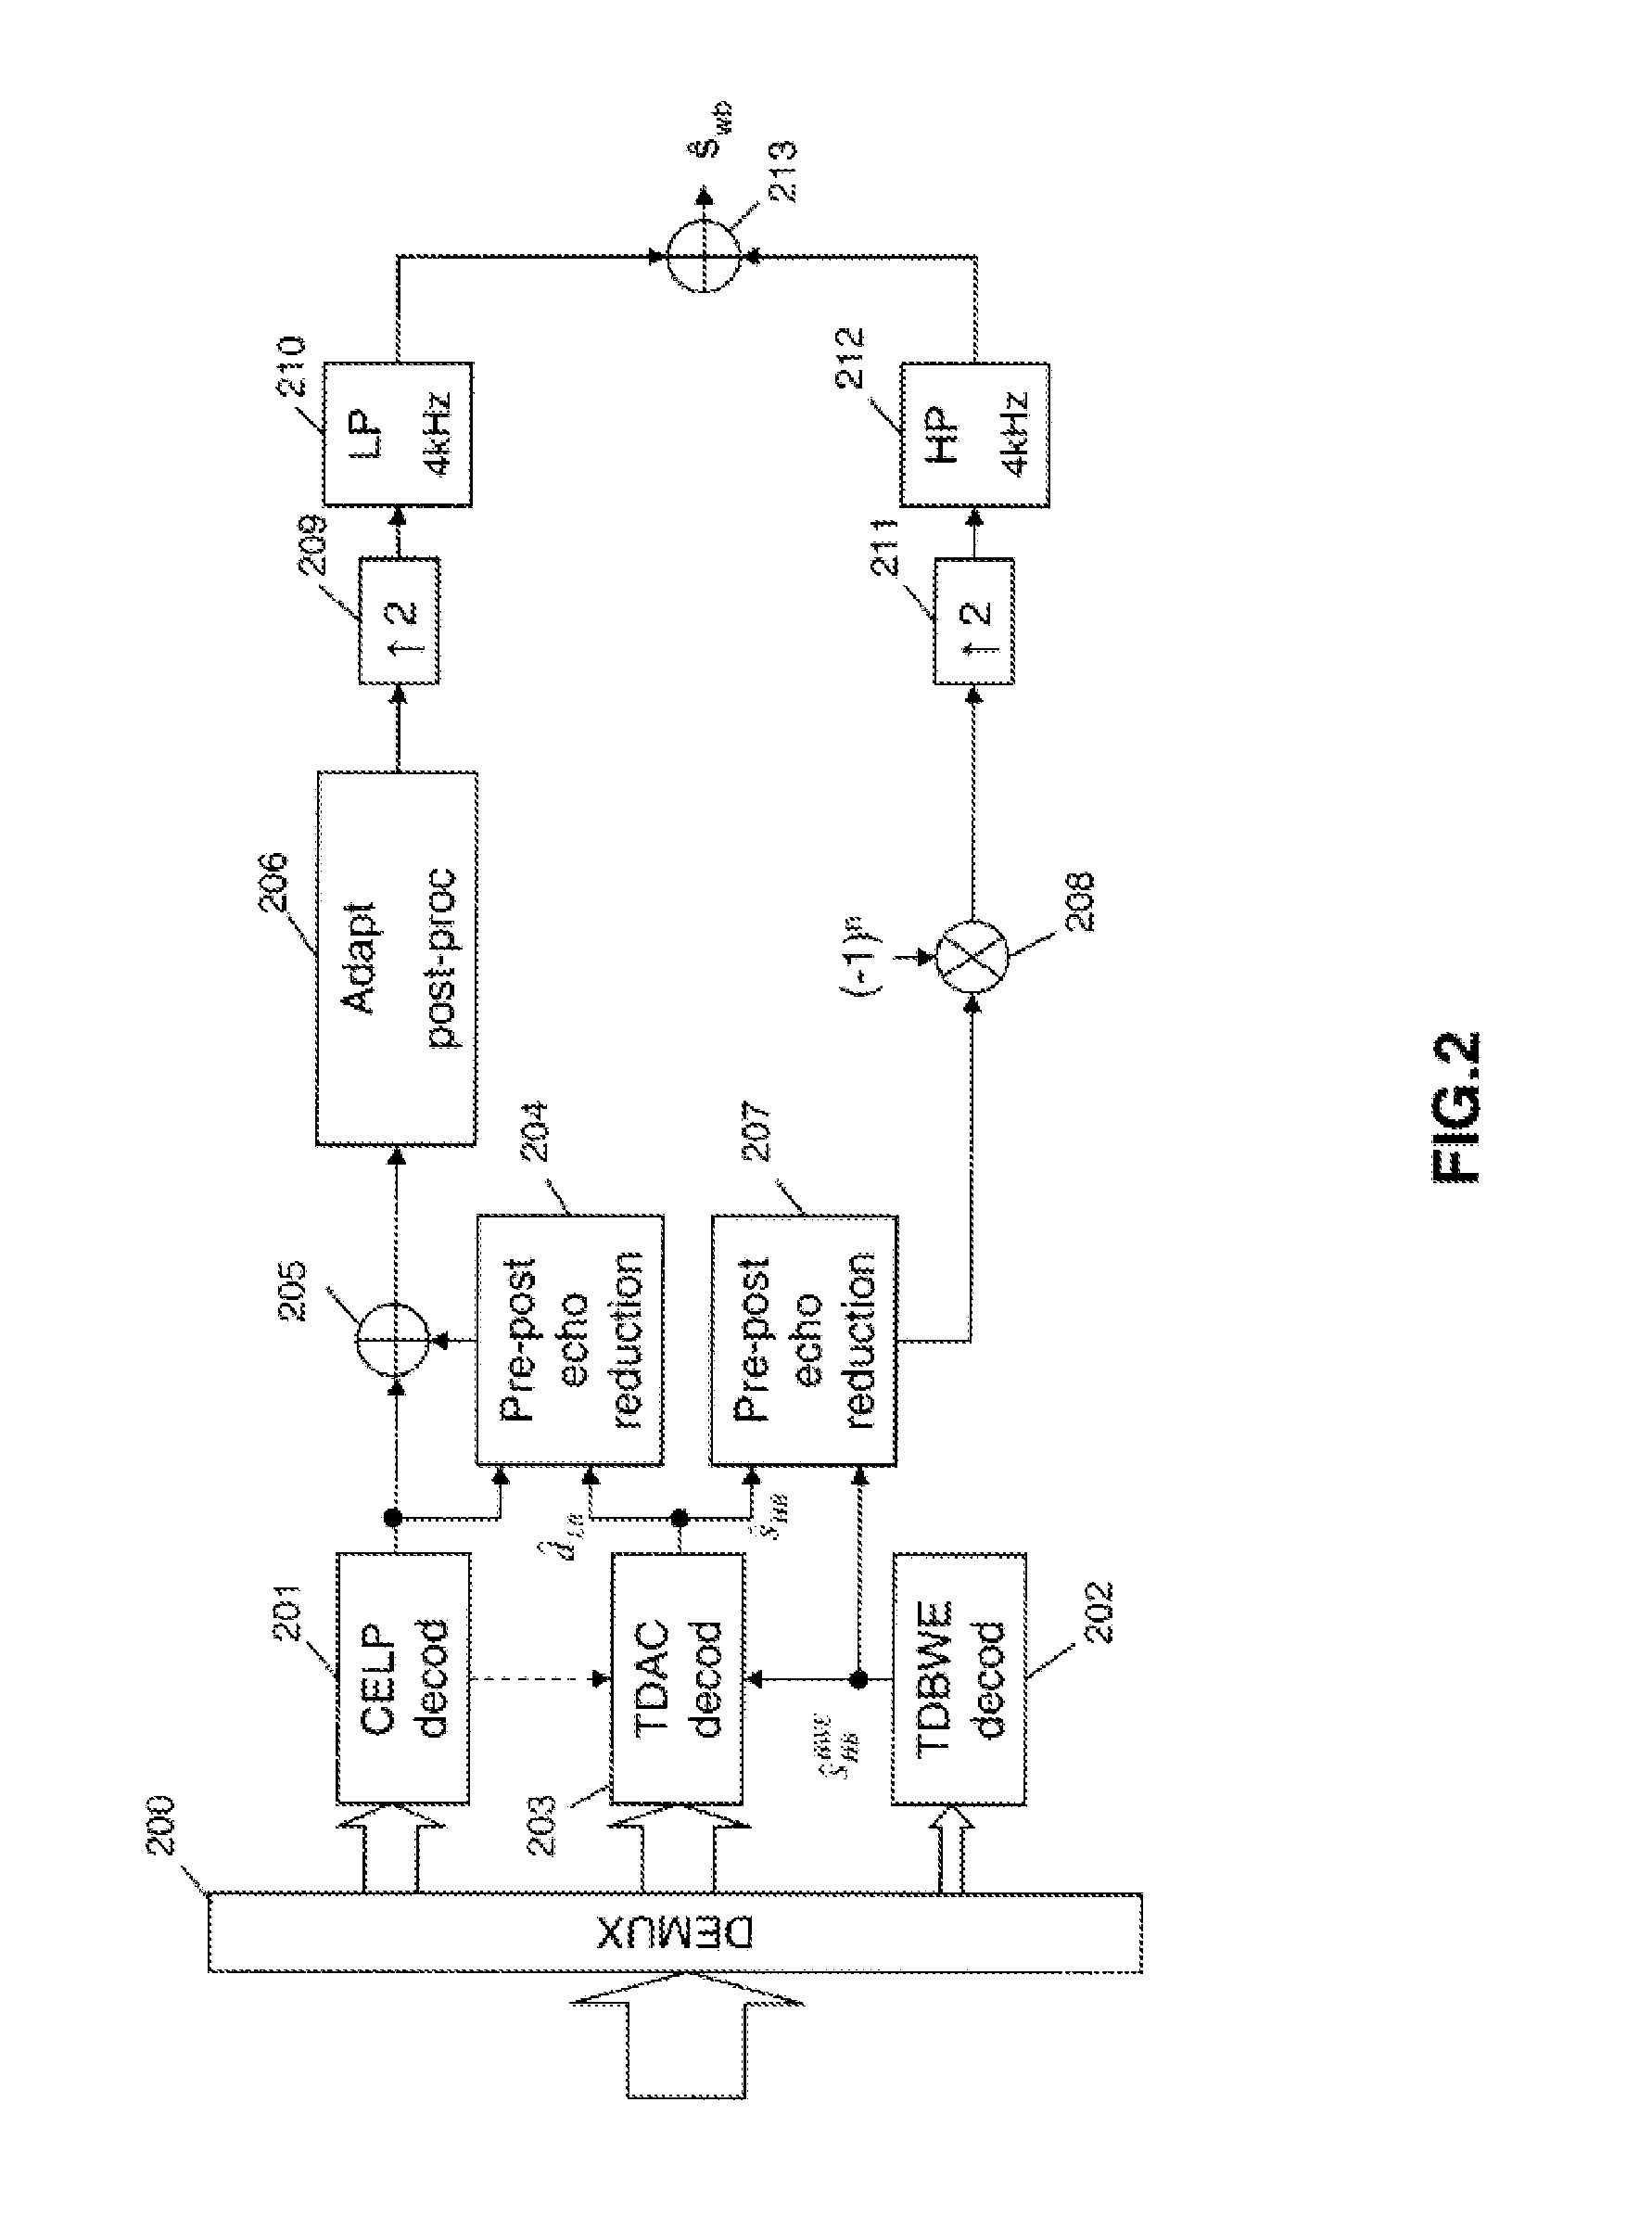 Allocation of bits in an enhancement coding/decoding for improving a hierarchical coding/decoding of digital audio signals